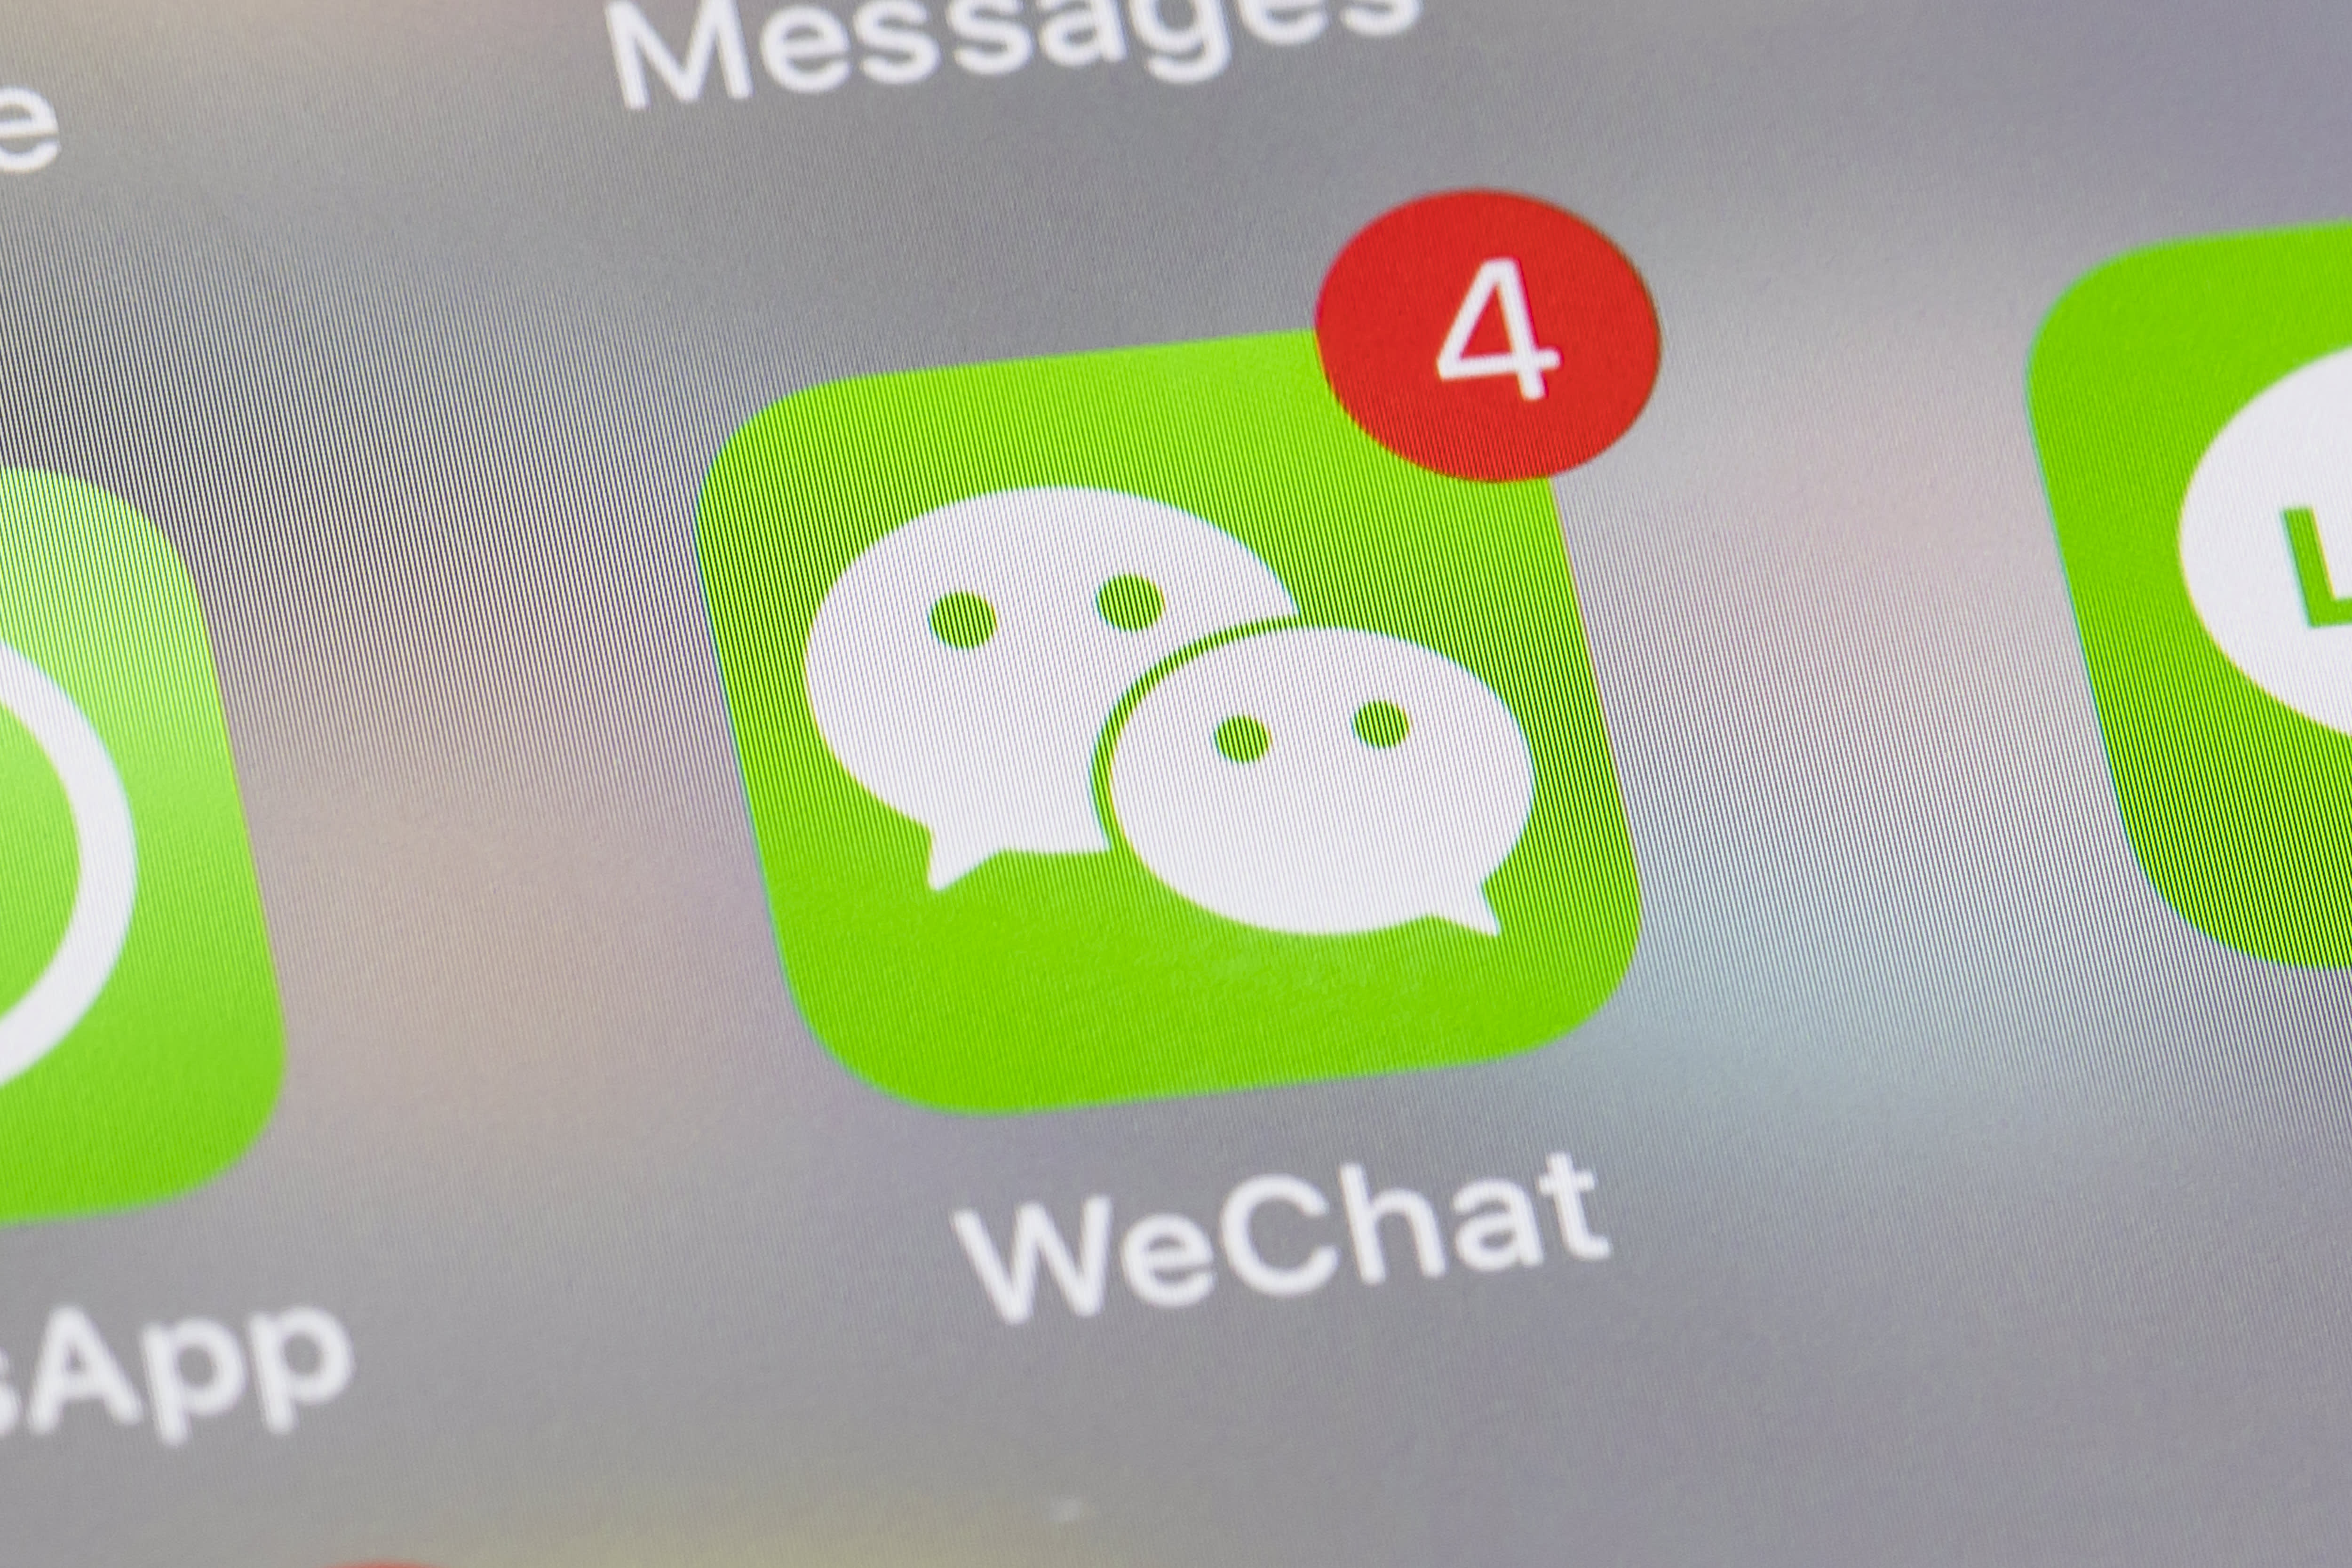 China’s digital currency comes to Tencent’s WeChat in expansion push